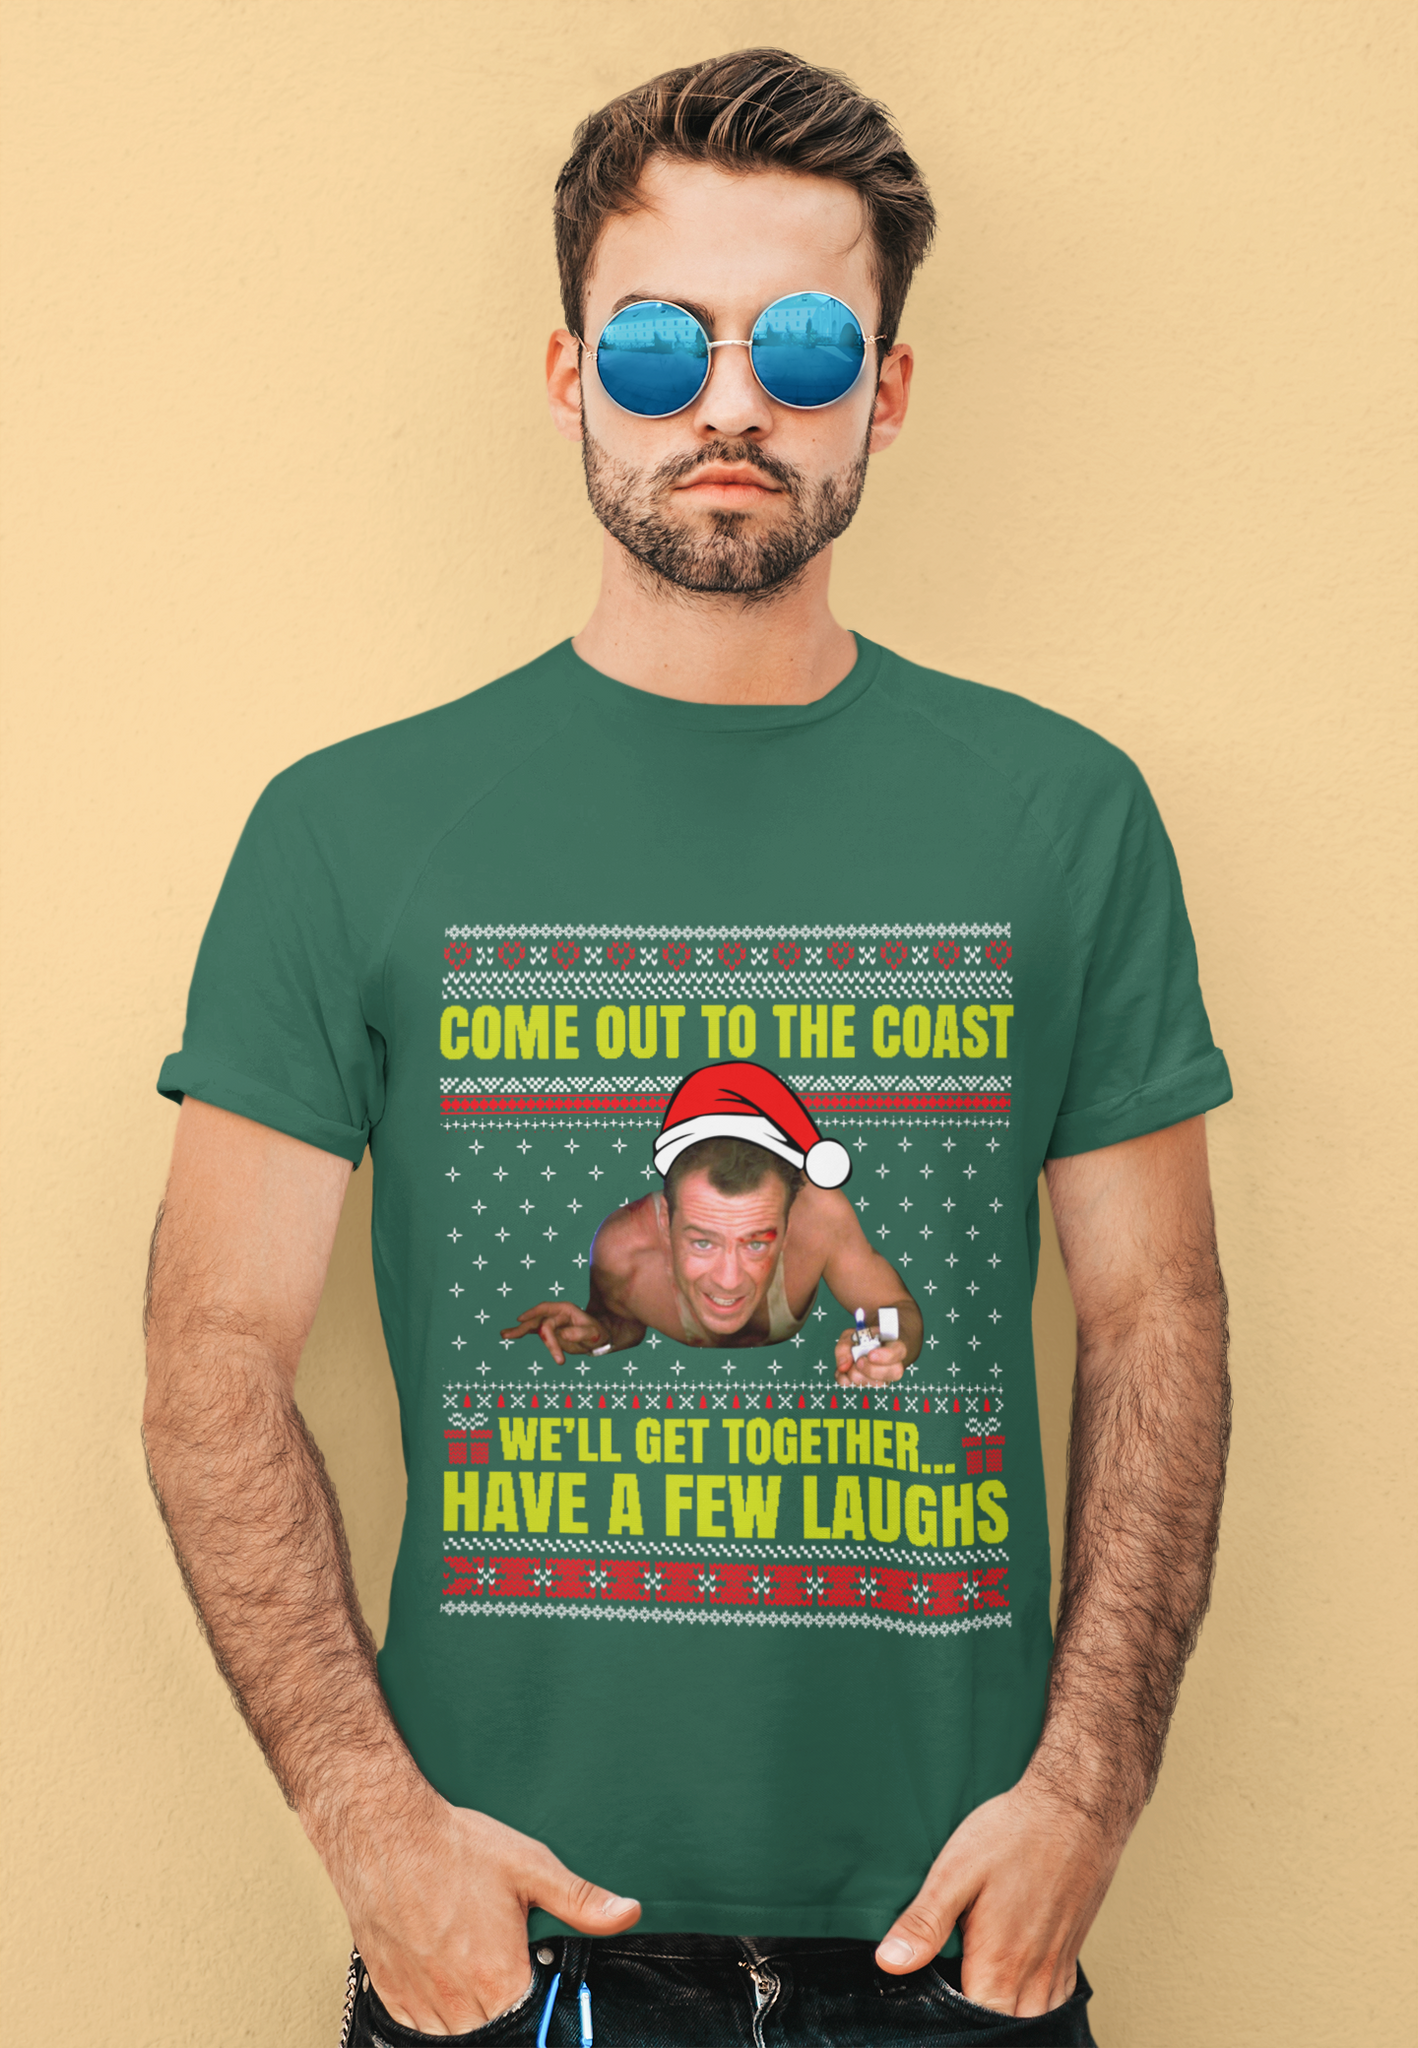 Die Hard Ugly Sweater Shirt, John McClane Tshirt, Come Out To The Coast Well Get Together T Shirt, Christmas Gifts